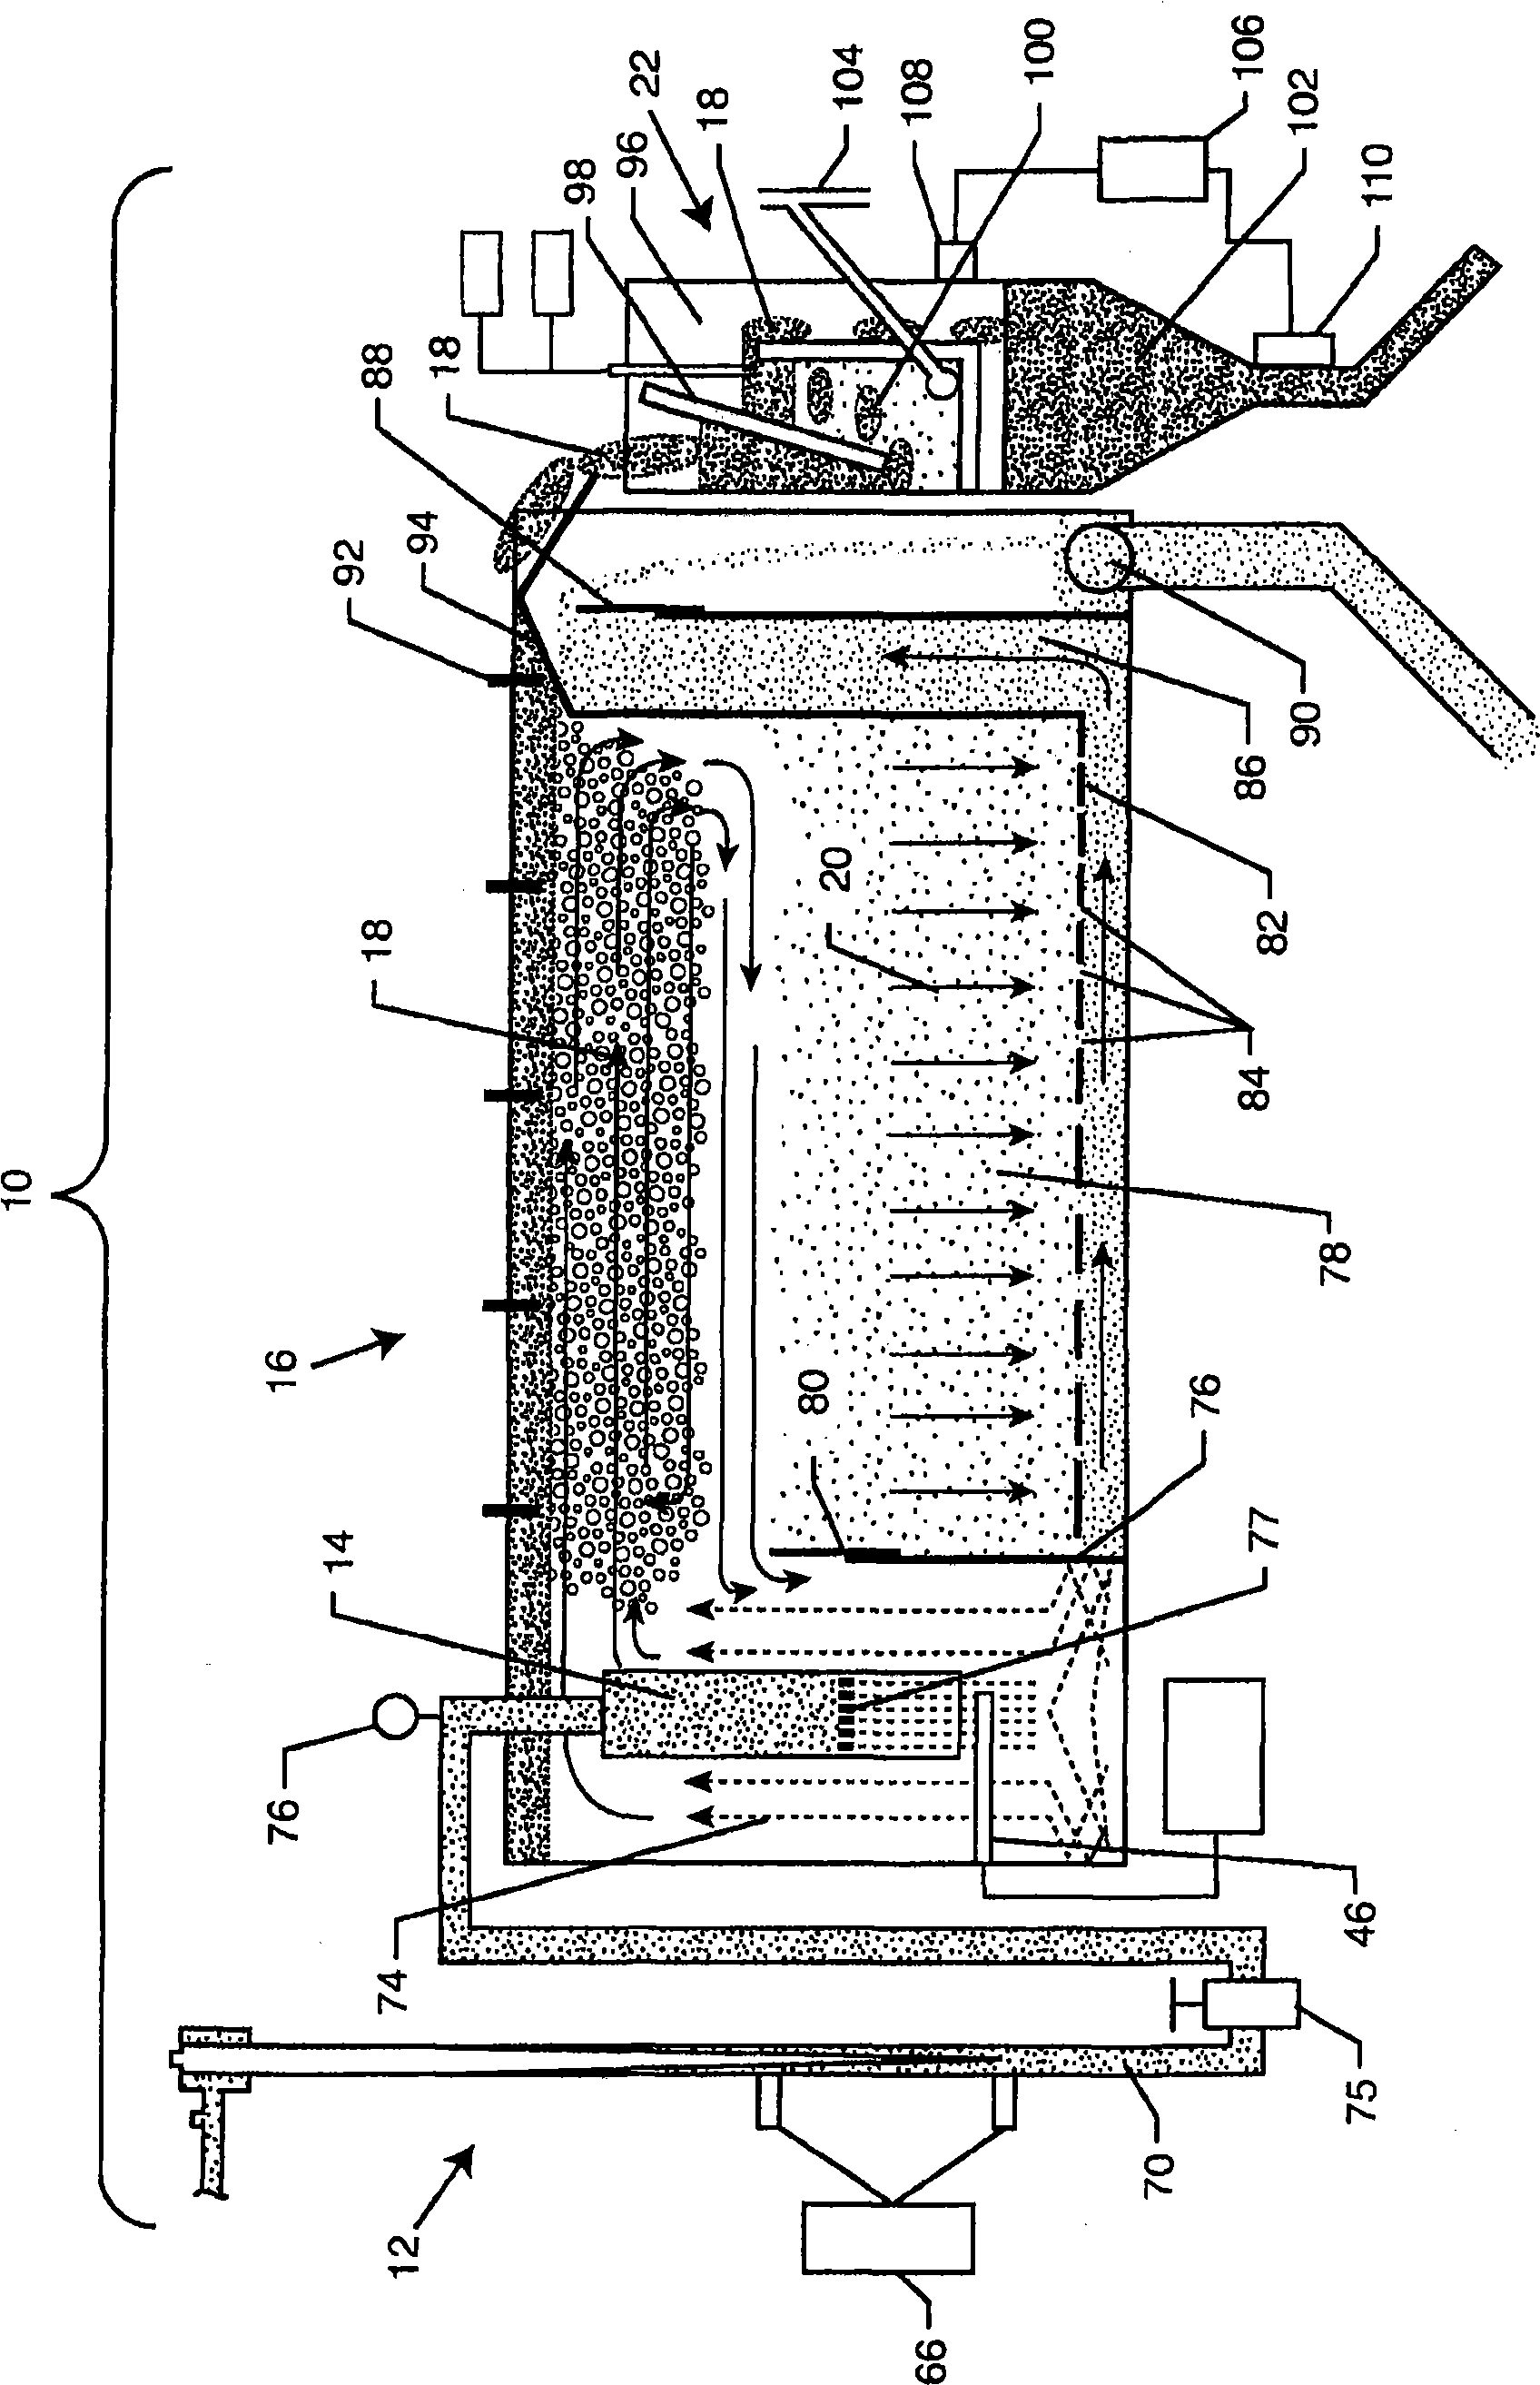 Control system and process for wastewater treatment